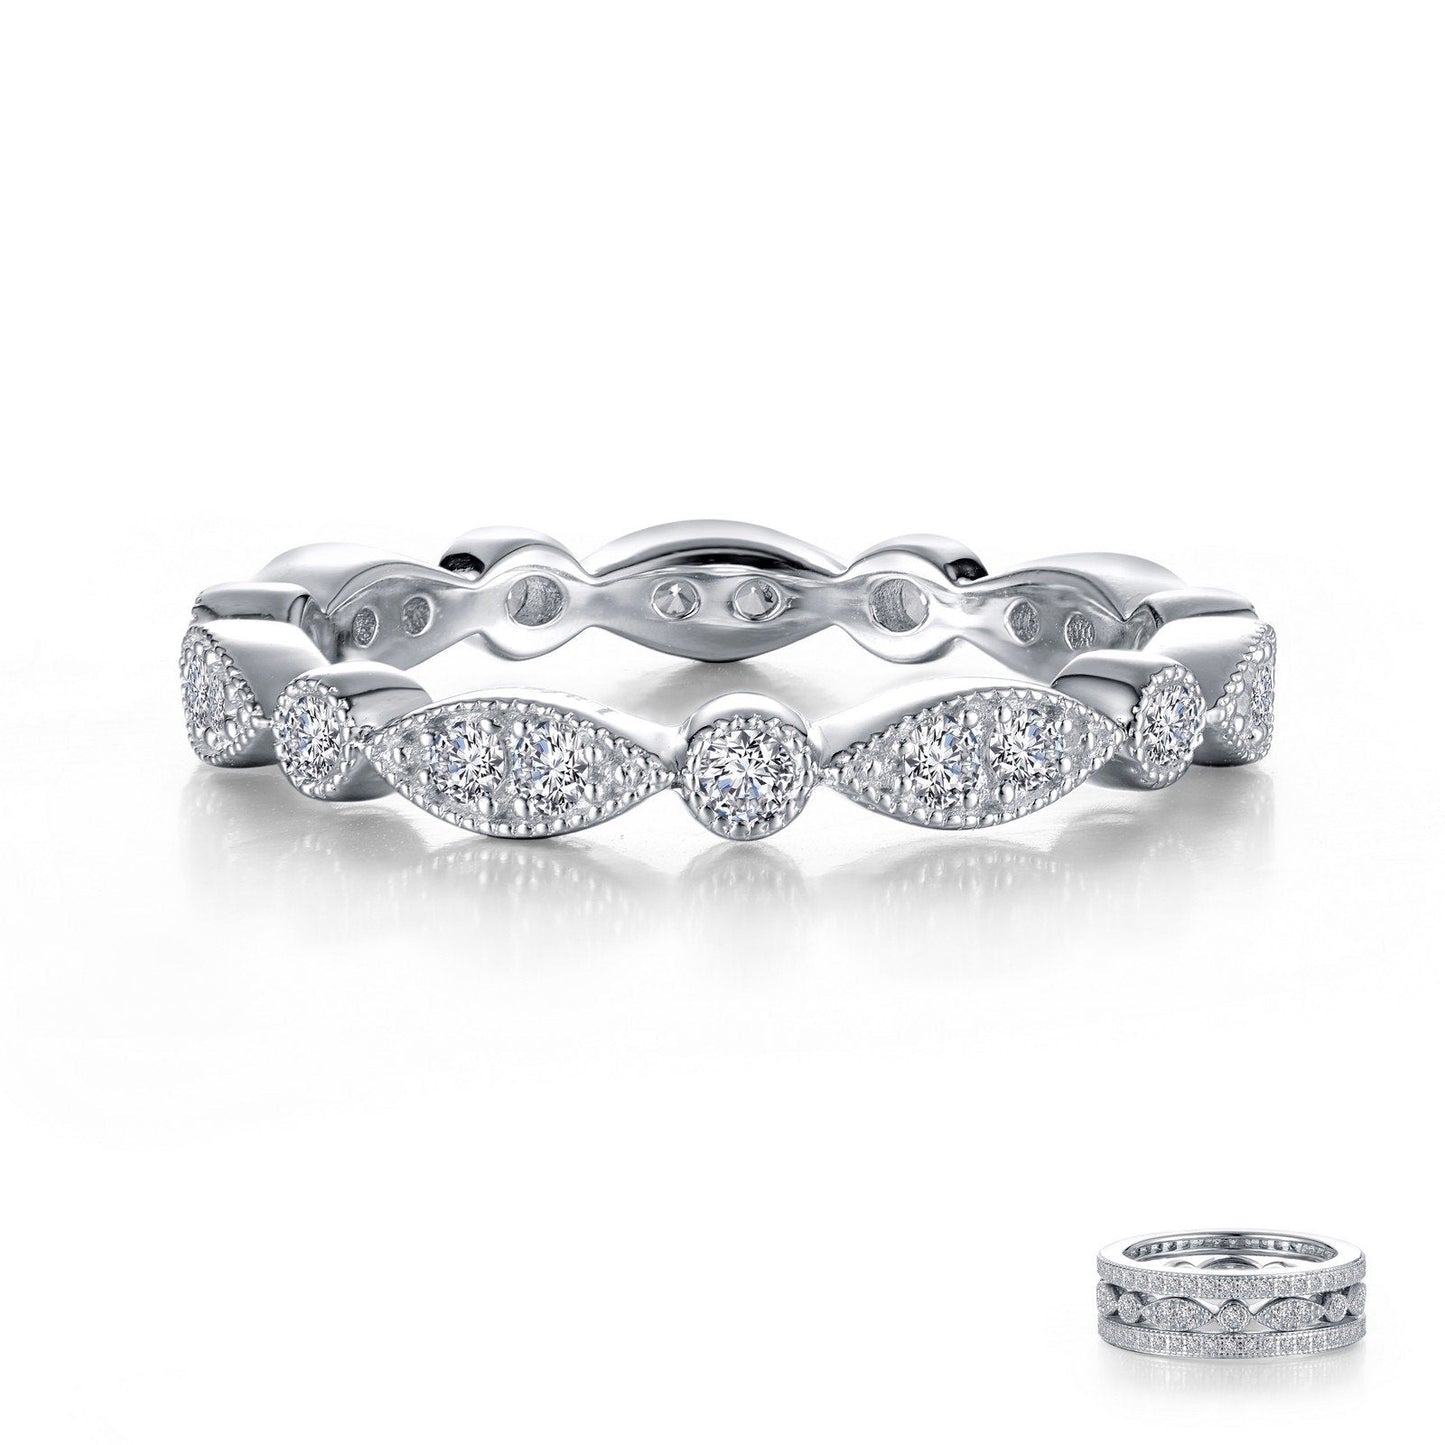 Lafonn Stackable Wave Eternity Band Simulated Diamond RINGS Size 9 Platinum 0.32 CTS Approx.2.80mm(W)